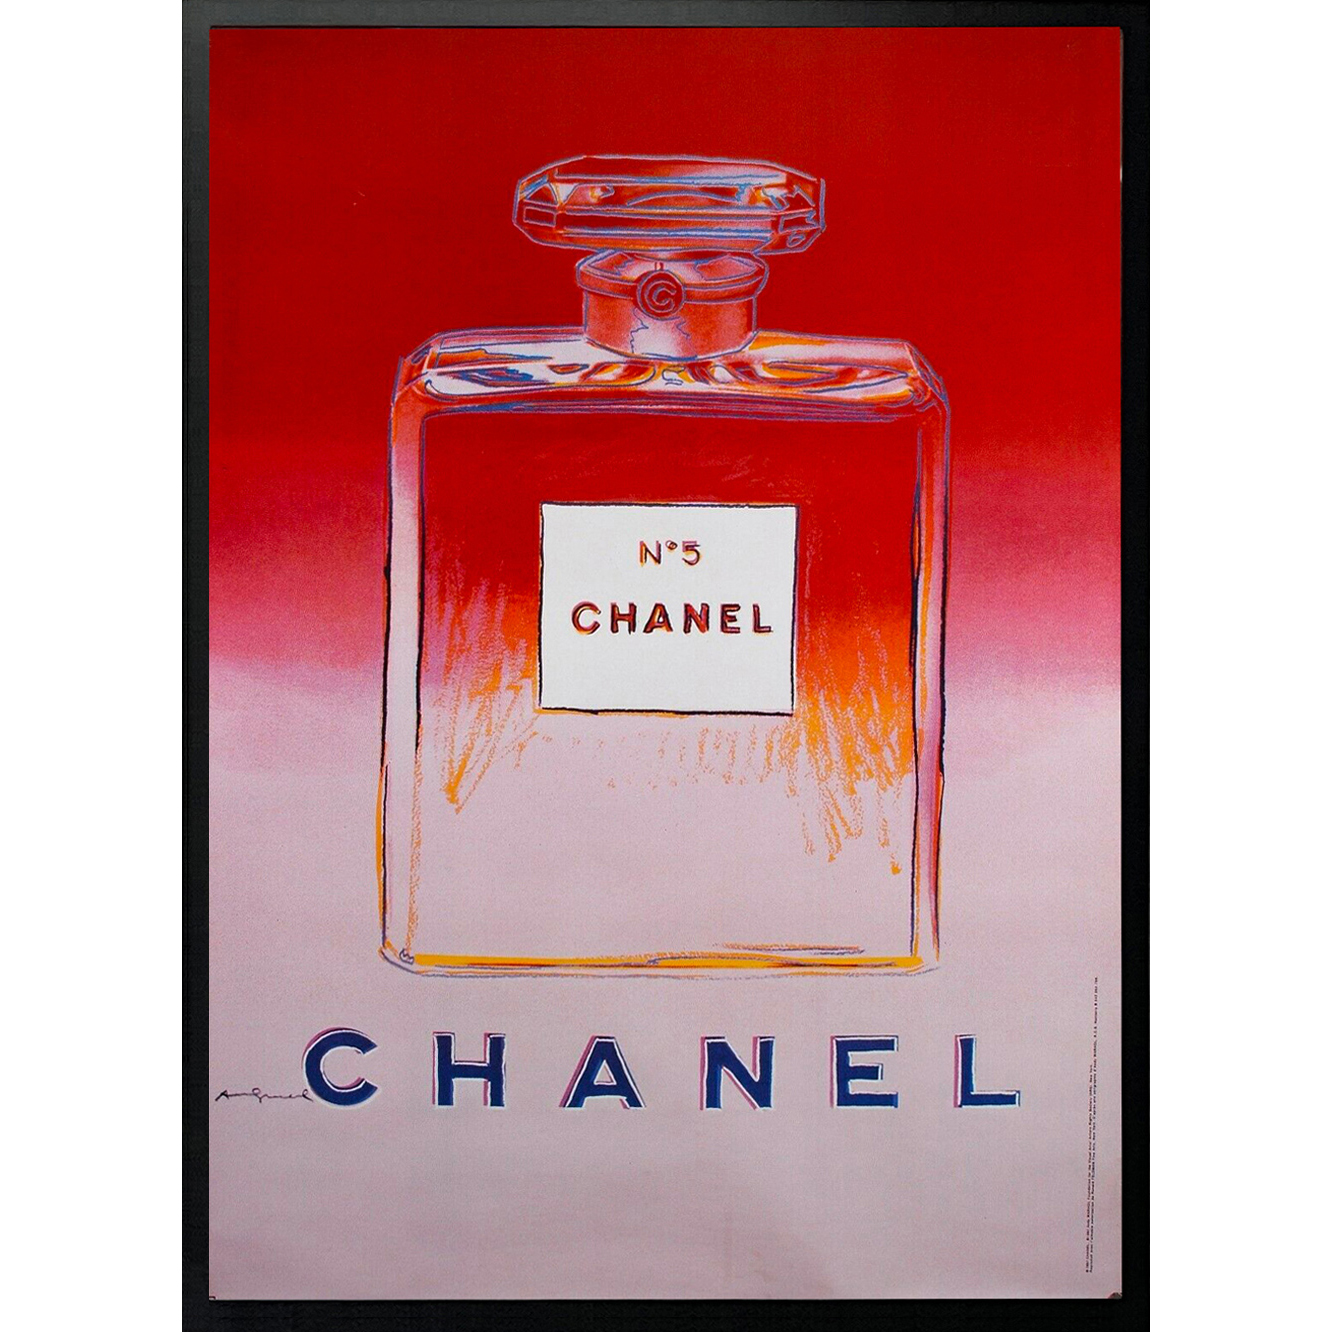 Andy WARHOL - CHANEL 5 Poster